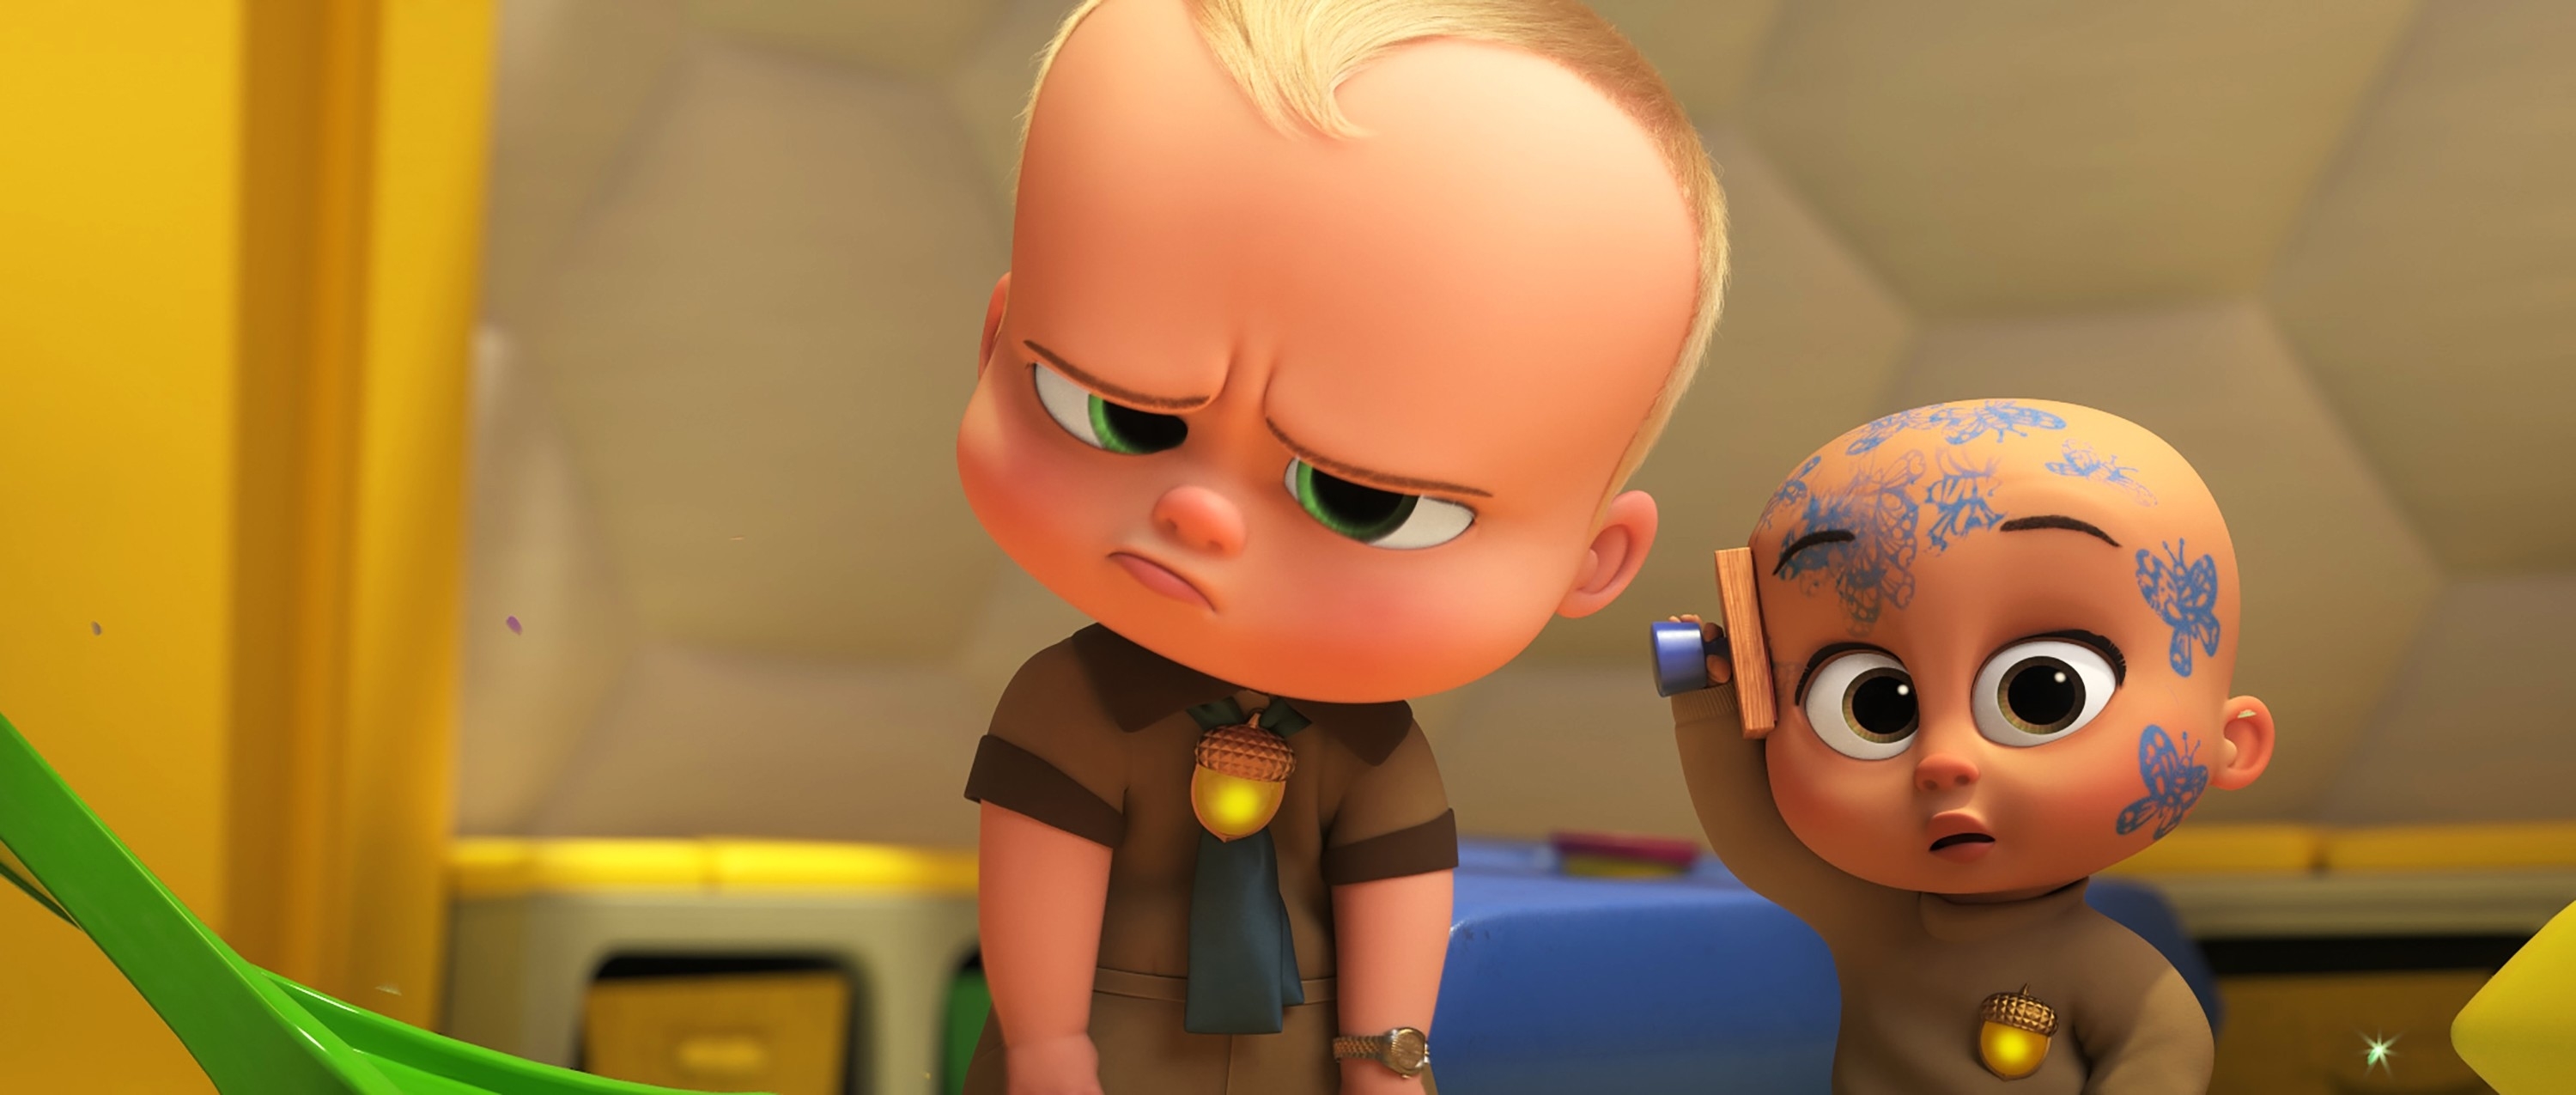 Animated characters Boss Baby and his brother in a scene, showing expressions of concern and confusion